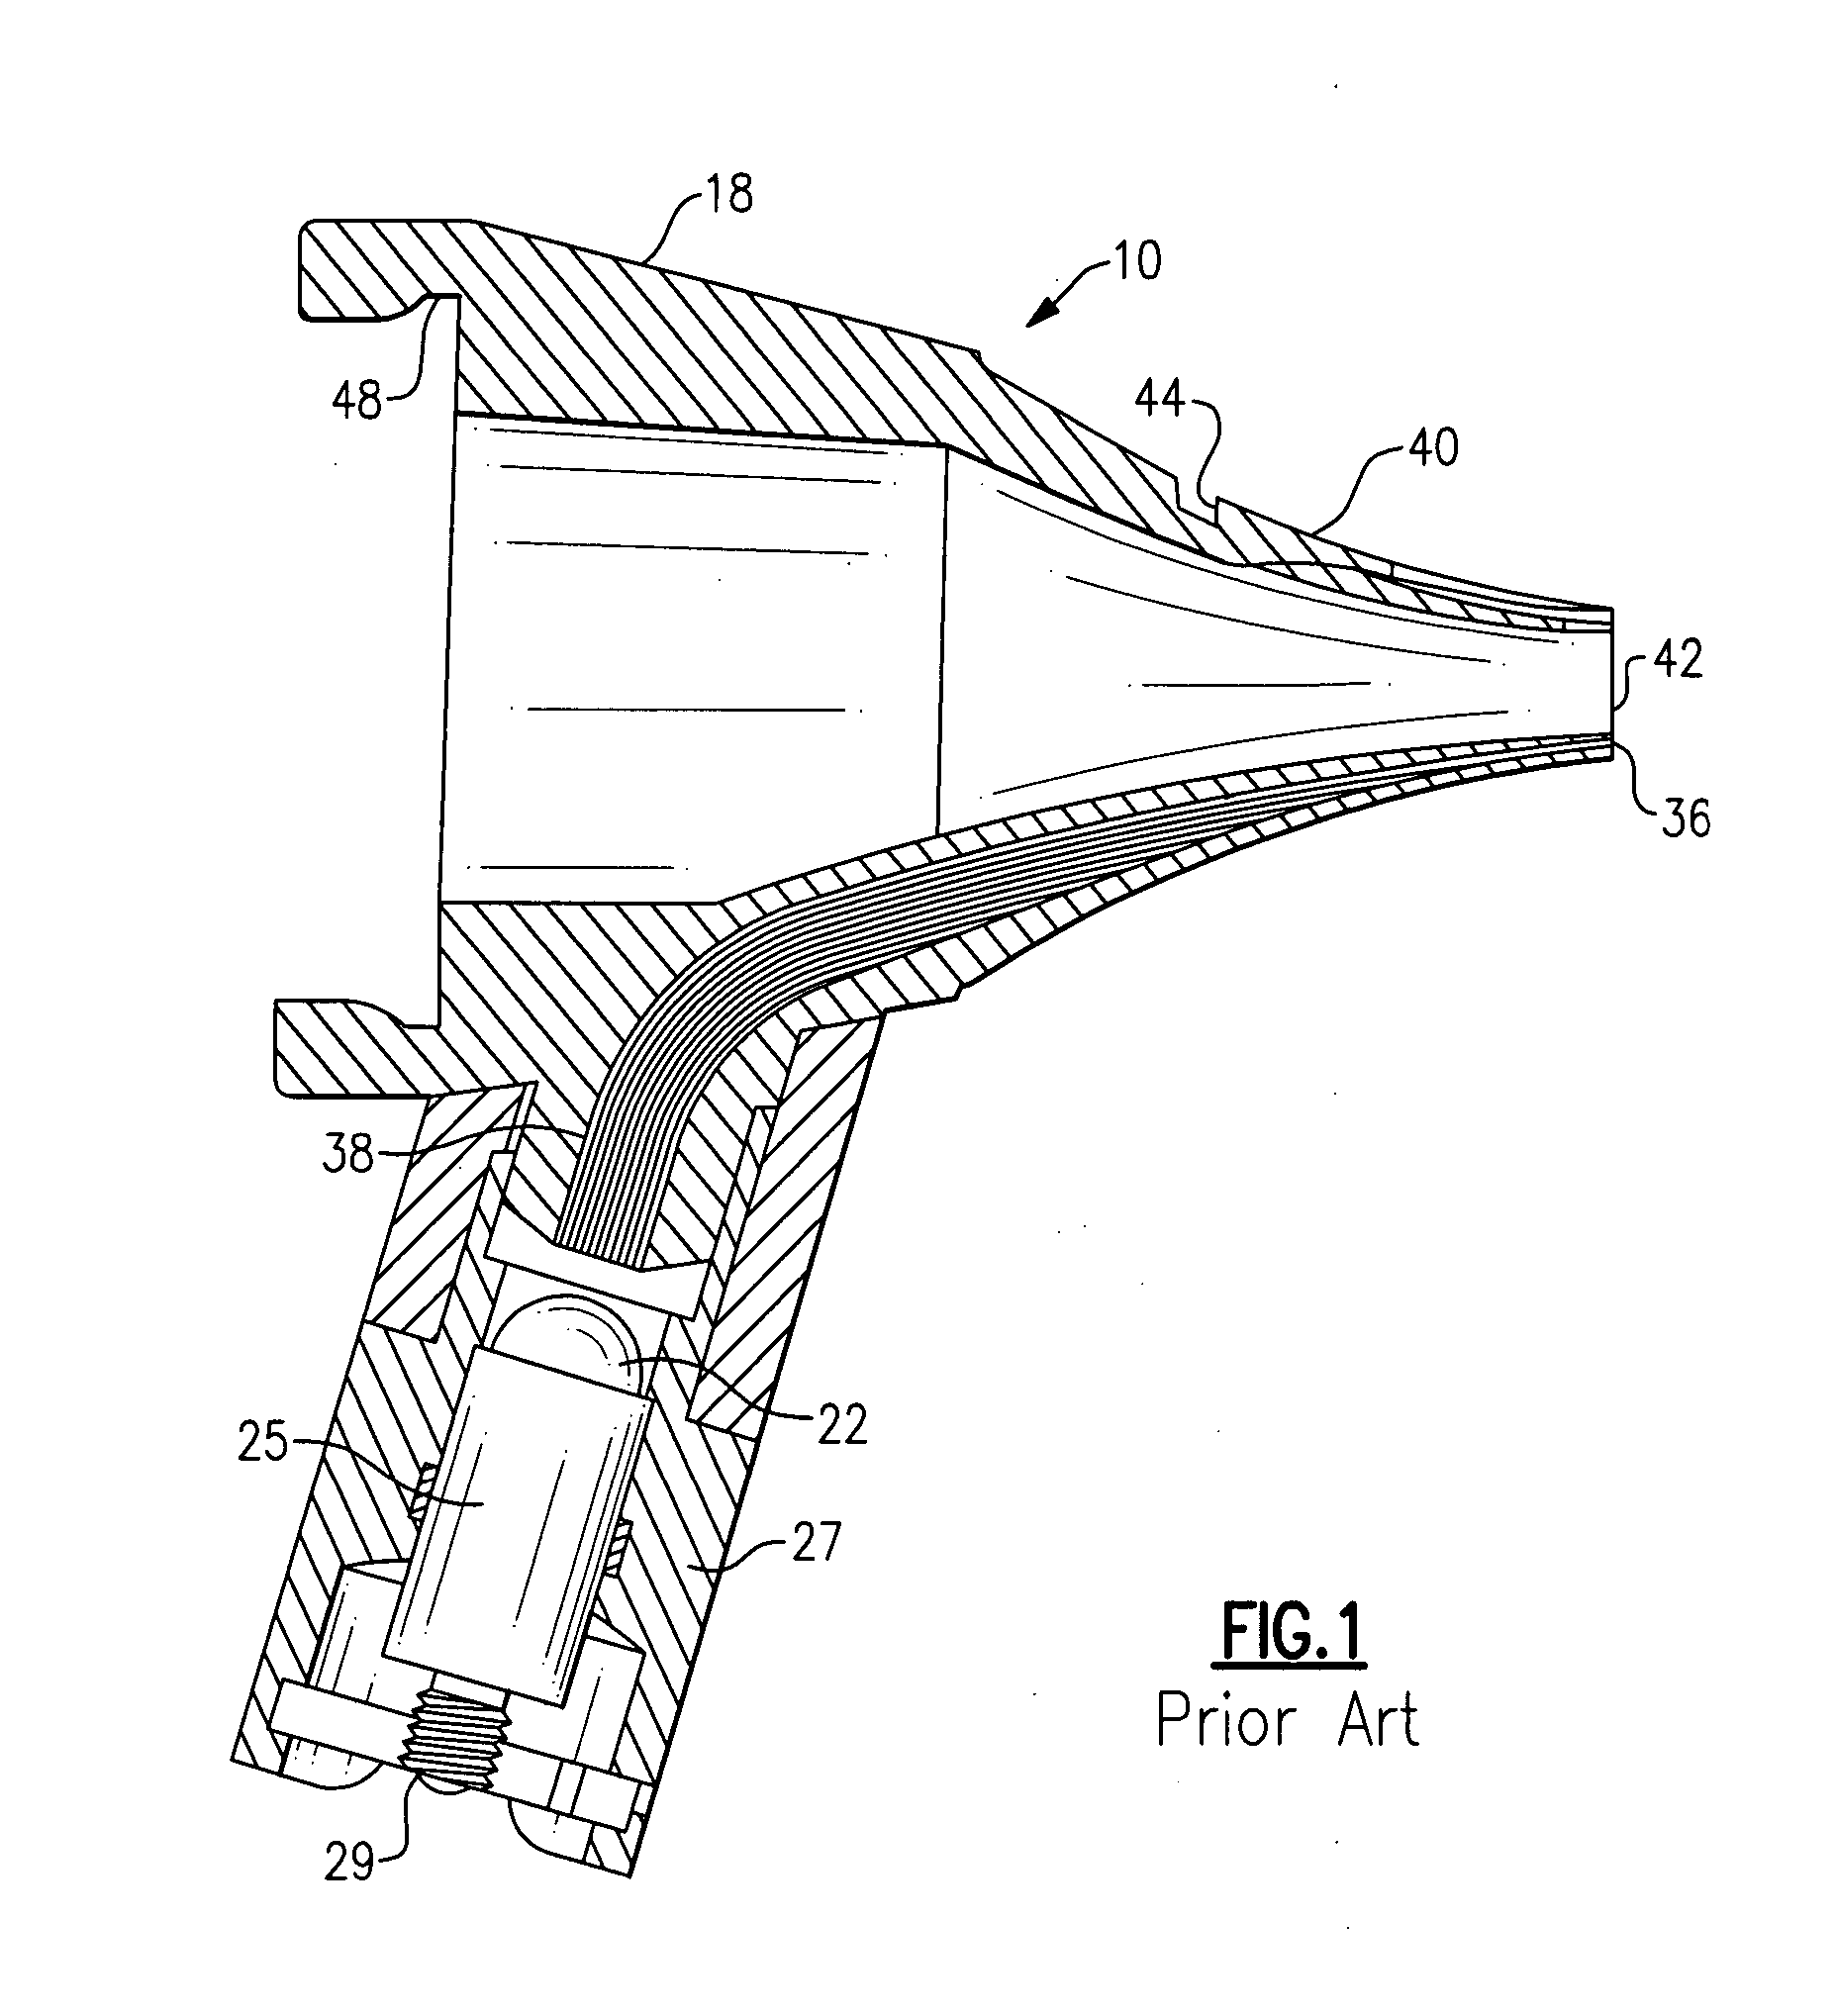 Electrical adapter for medical diagnostic instruments using replaceable LEDs as illumination sources